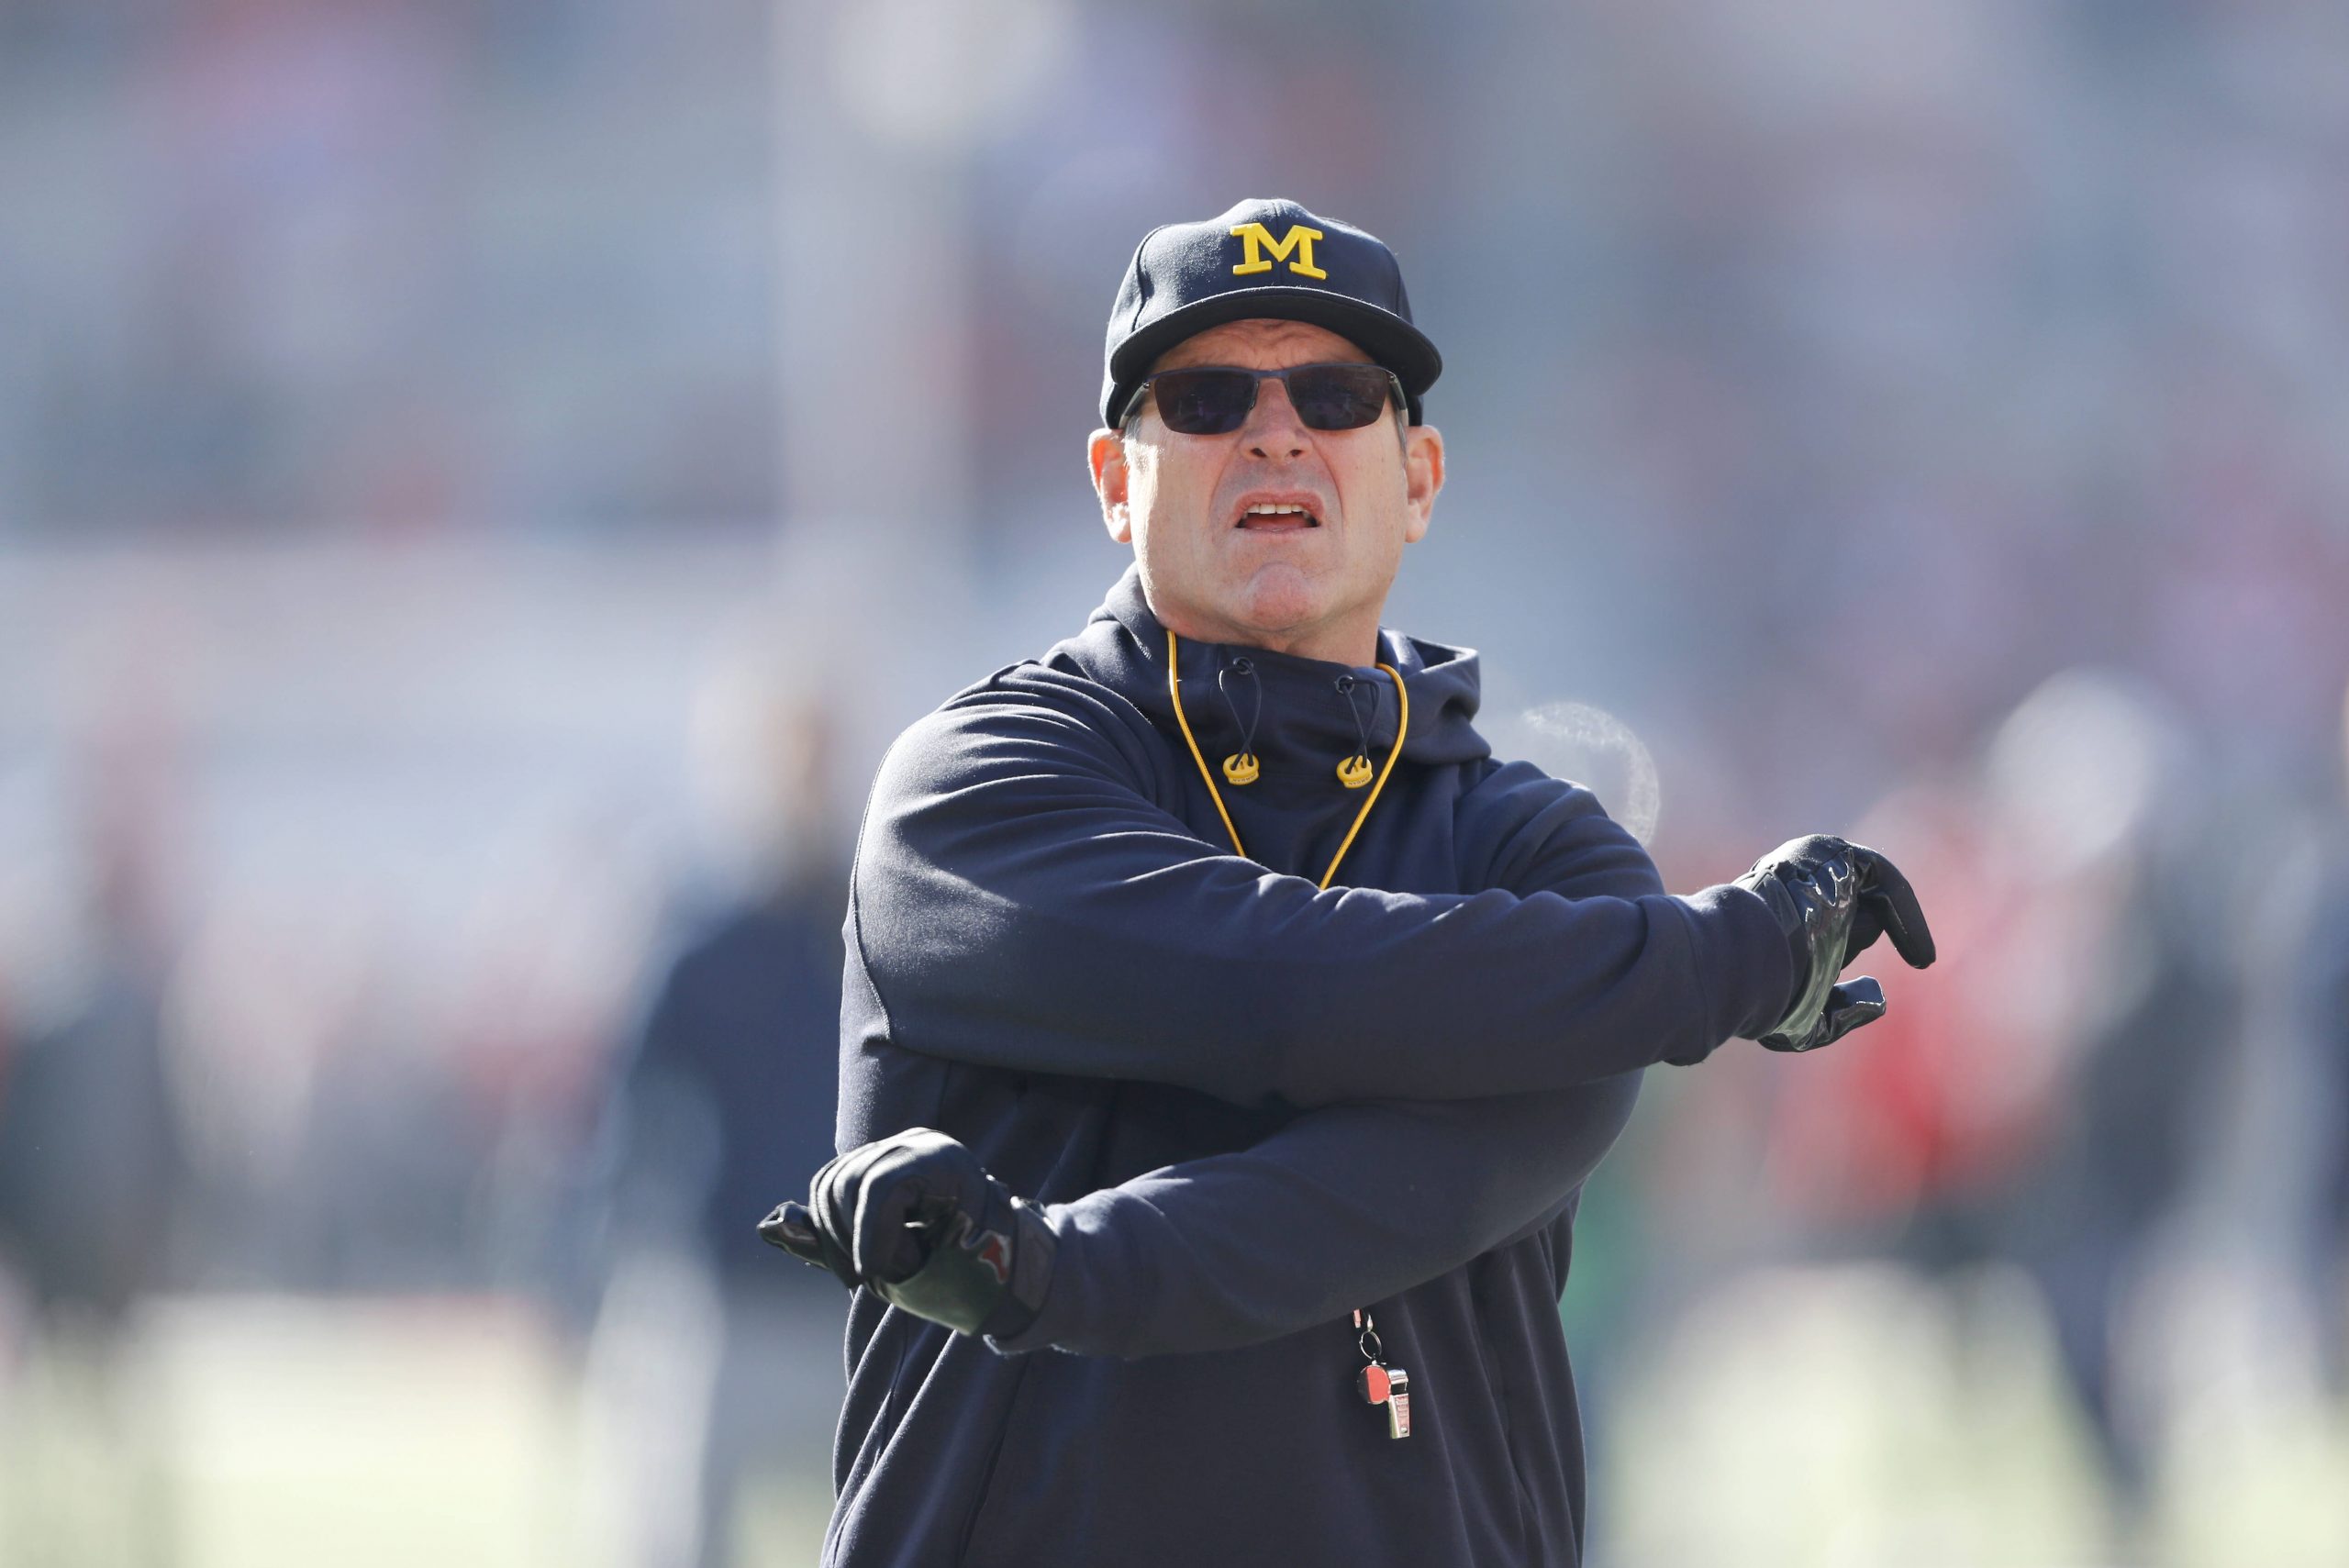 Jim Harbaugh - NCAA, College League, USA Football: Michigan at Ohio State Nov 26, 2022 Columbus, Ohio, USA Michigan Wolverines head coach Jim Harbaugh warms up before the game against the Ohio State Buckeyes at Ohio Stadium. Columbus Ohio Stadium Ohio USA, EDITORIAL USE ONLY PUBLICATIONxINxGERxSUIxAUTxONLY Copyright: xJosephxMaioranax 20221126_szo_mb3_0001